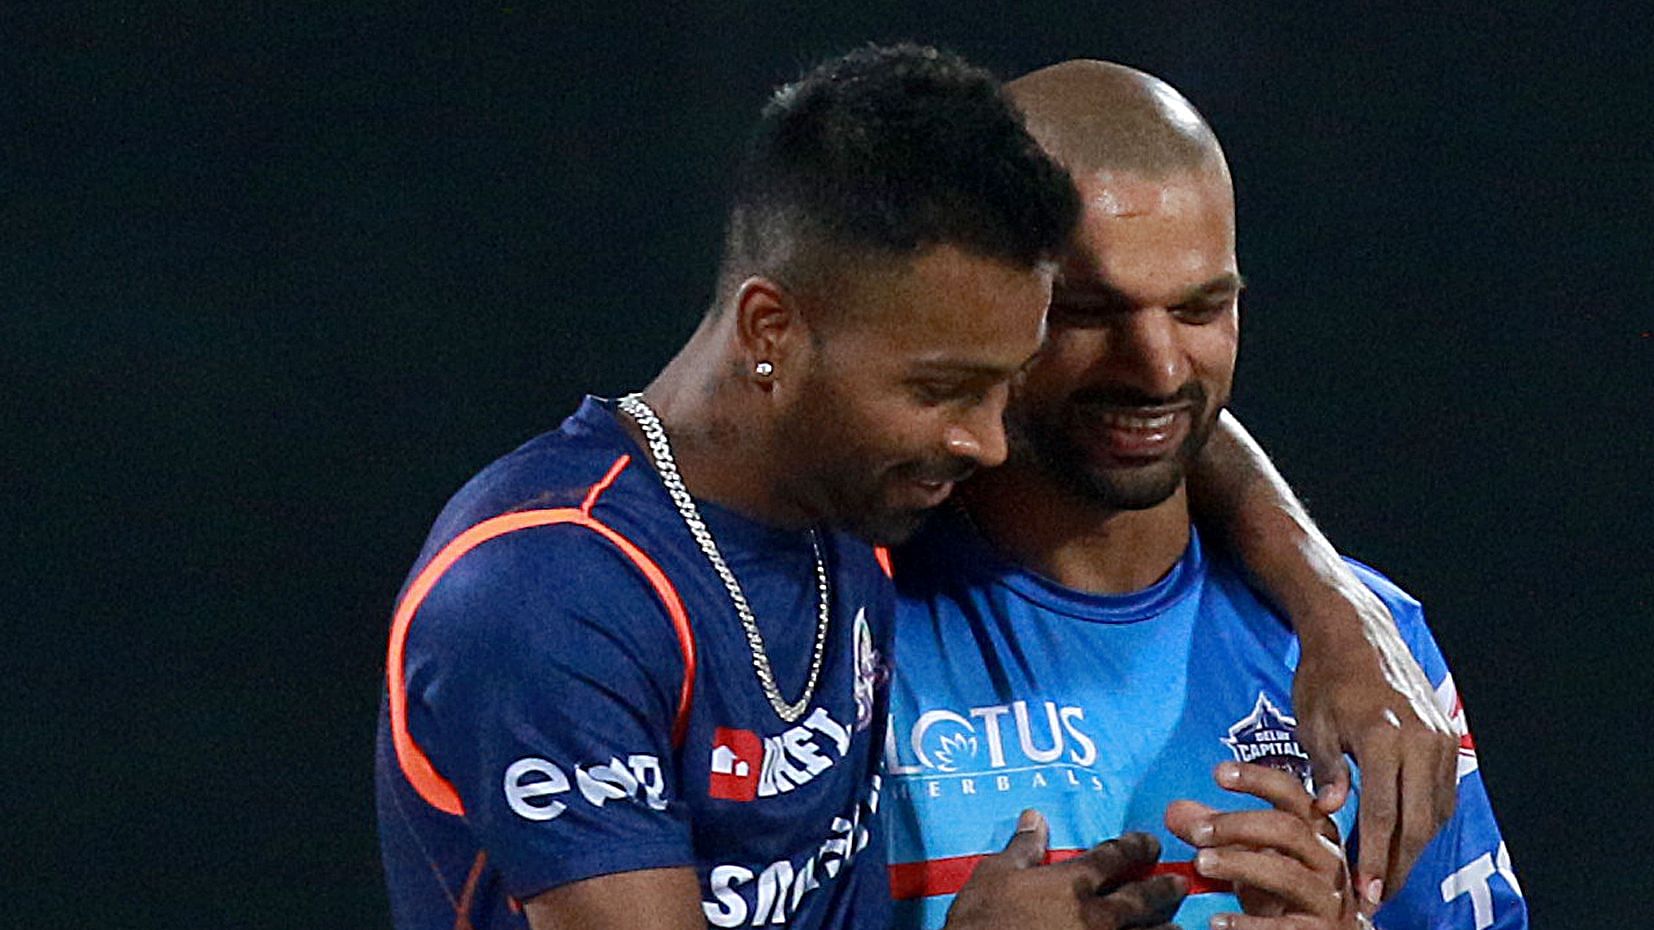 Pandya and Dhawan were seen sharing a hug as the bromance was clearly on display on Thursday before Delhi Capitals took on Mumbai Indians.